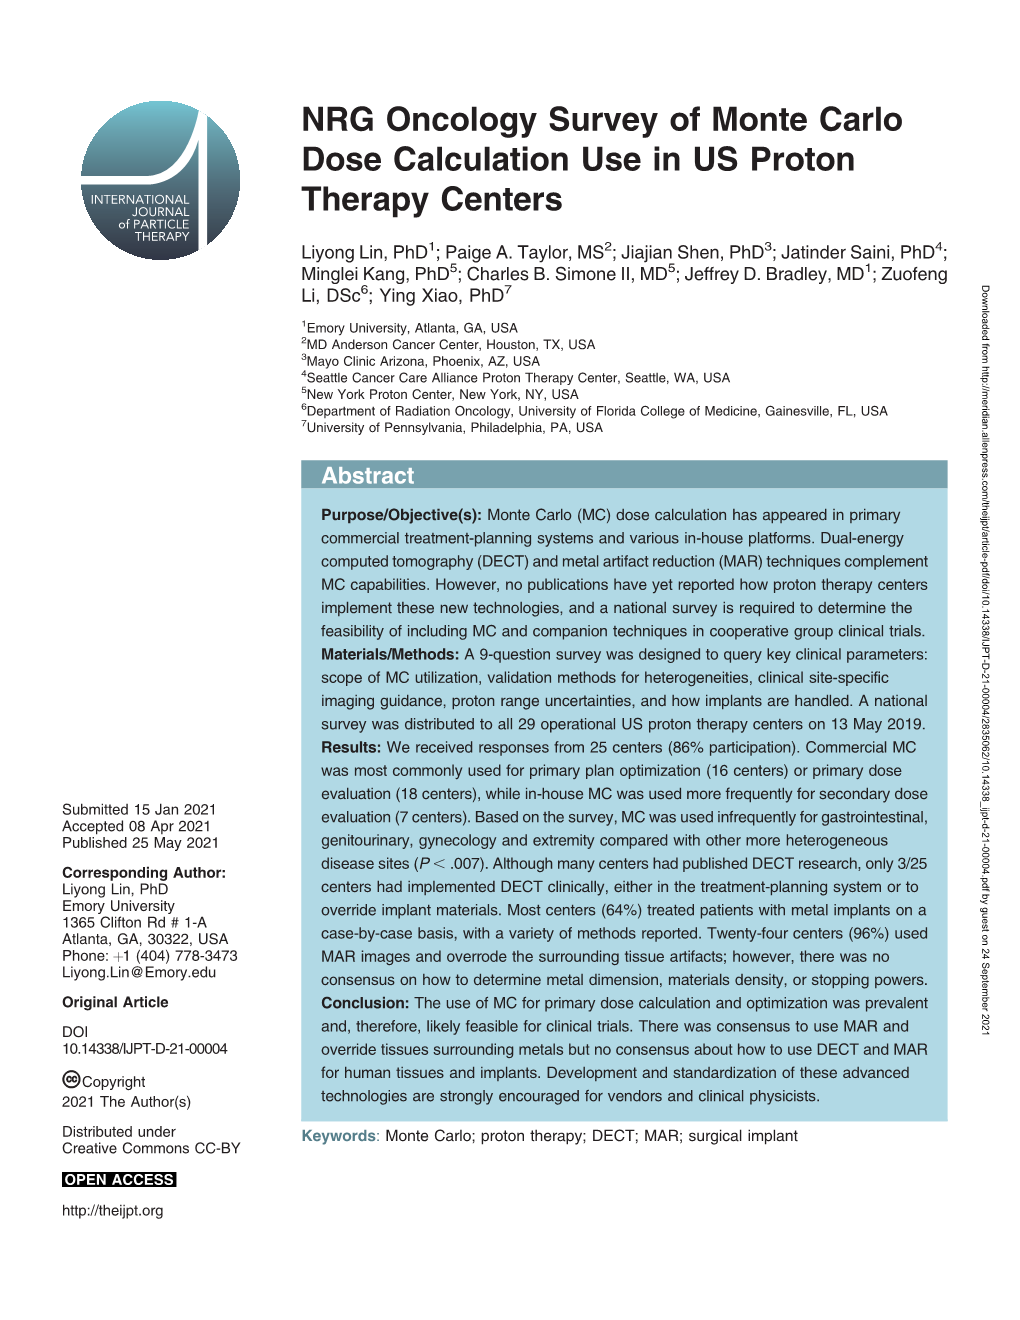 NRG Oncology Survey of Monte Carlo Dose Calculation Use in US Proton Therapy Centers